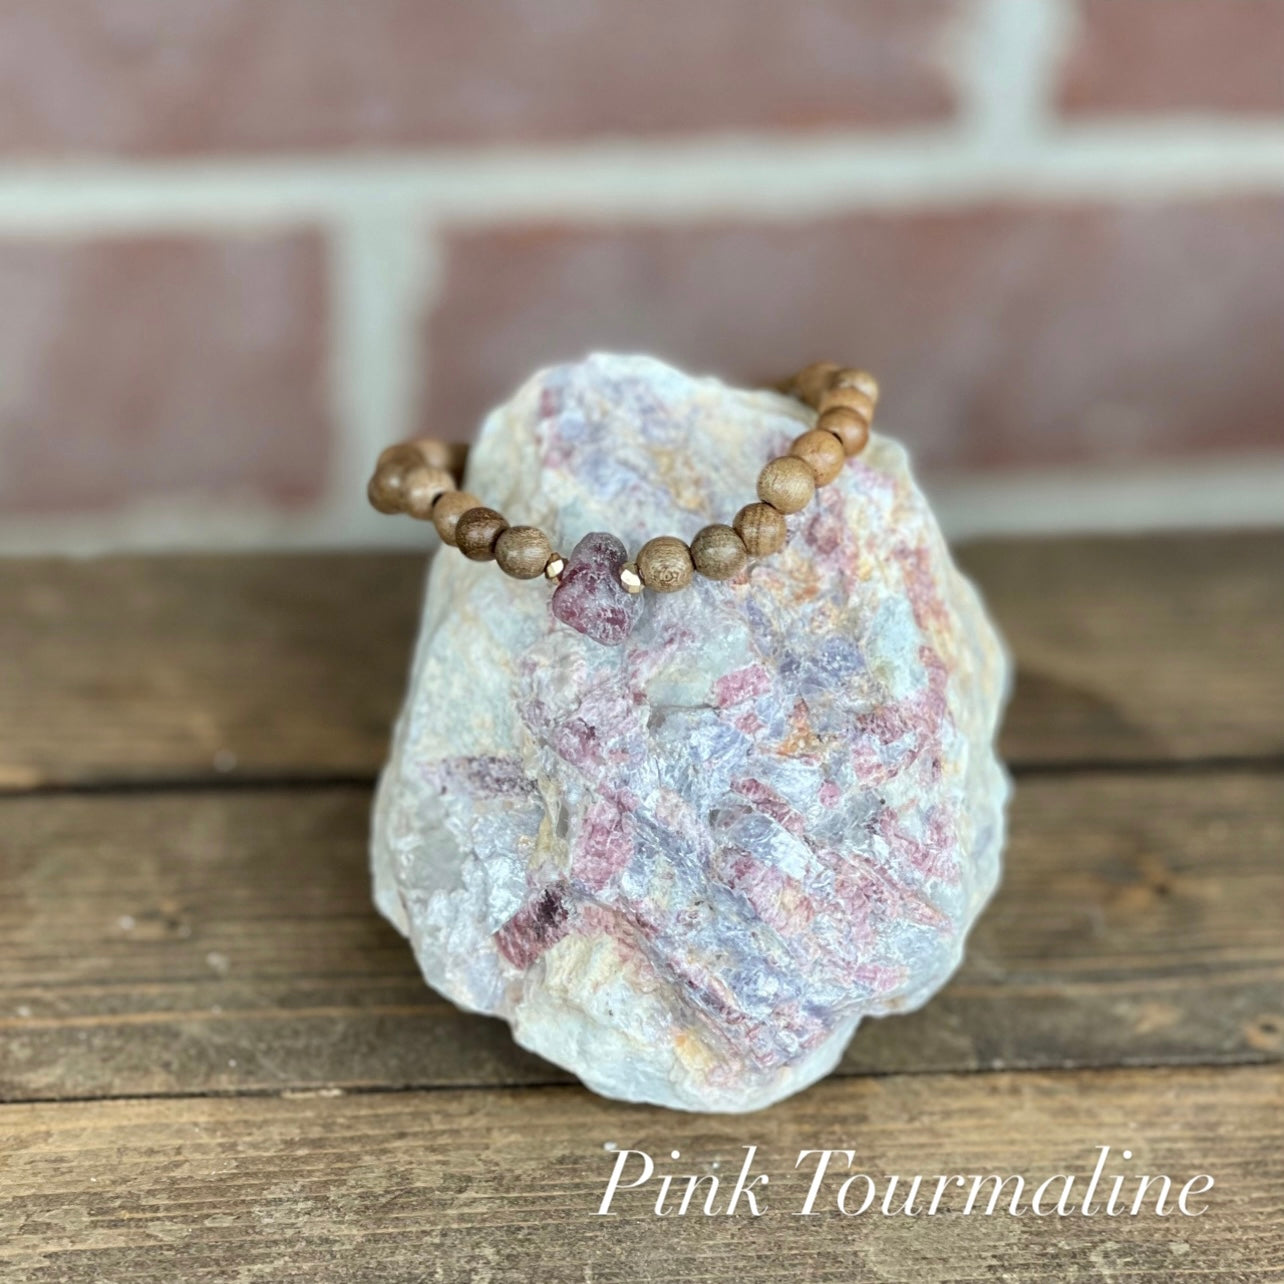 Raw Beauty Bracelets for Littles made with Raw Gemstones - Pink Tourmaline